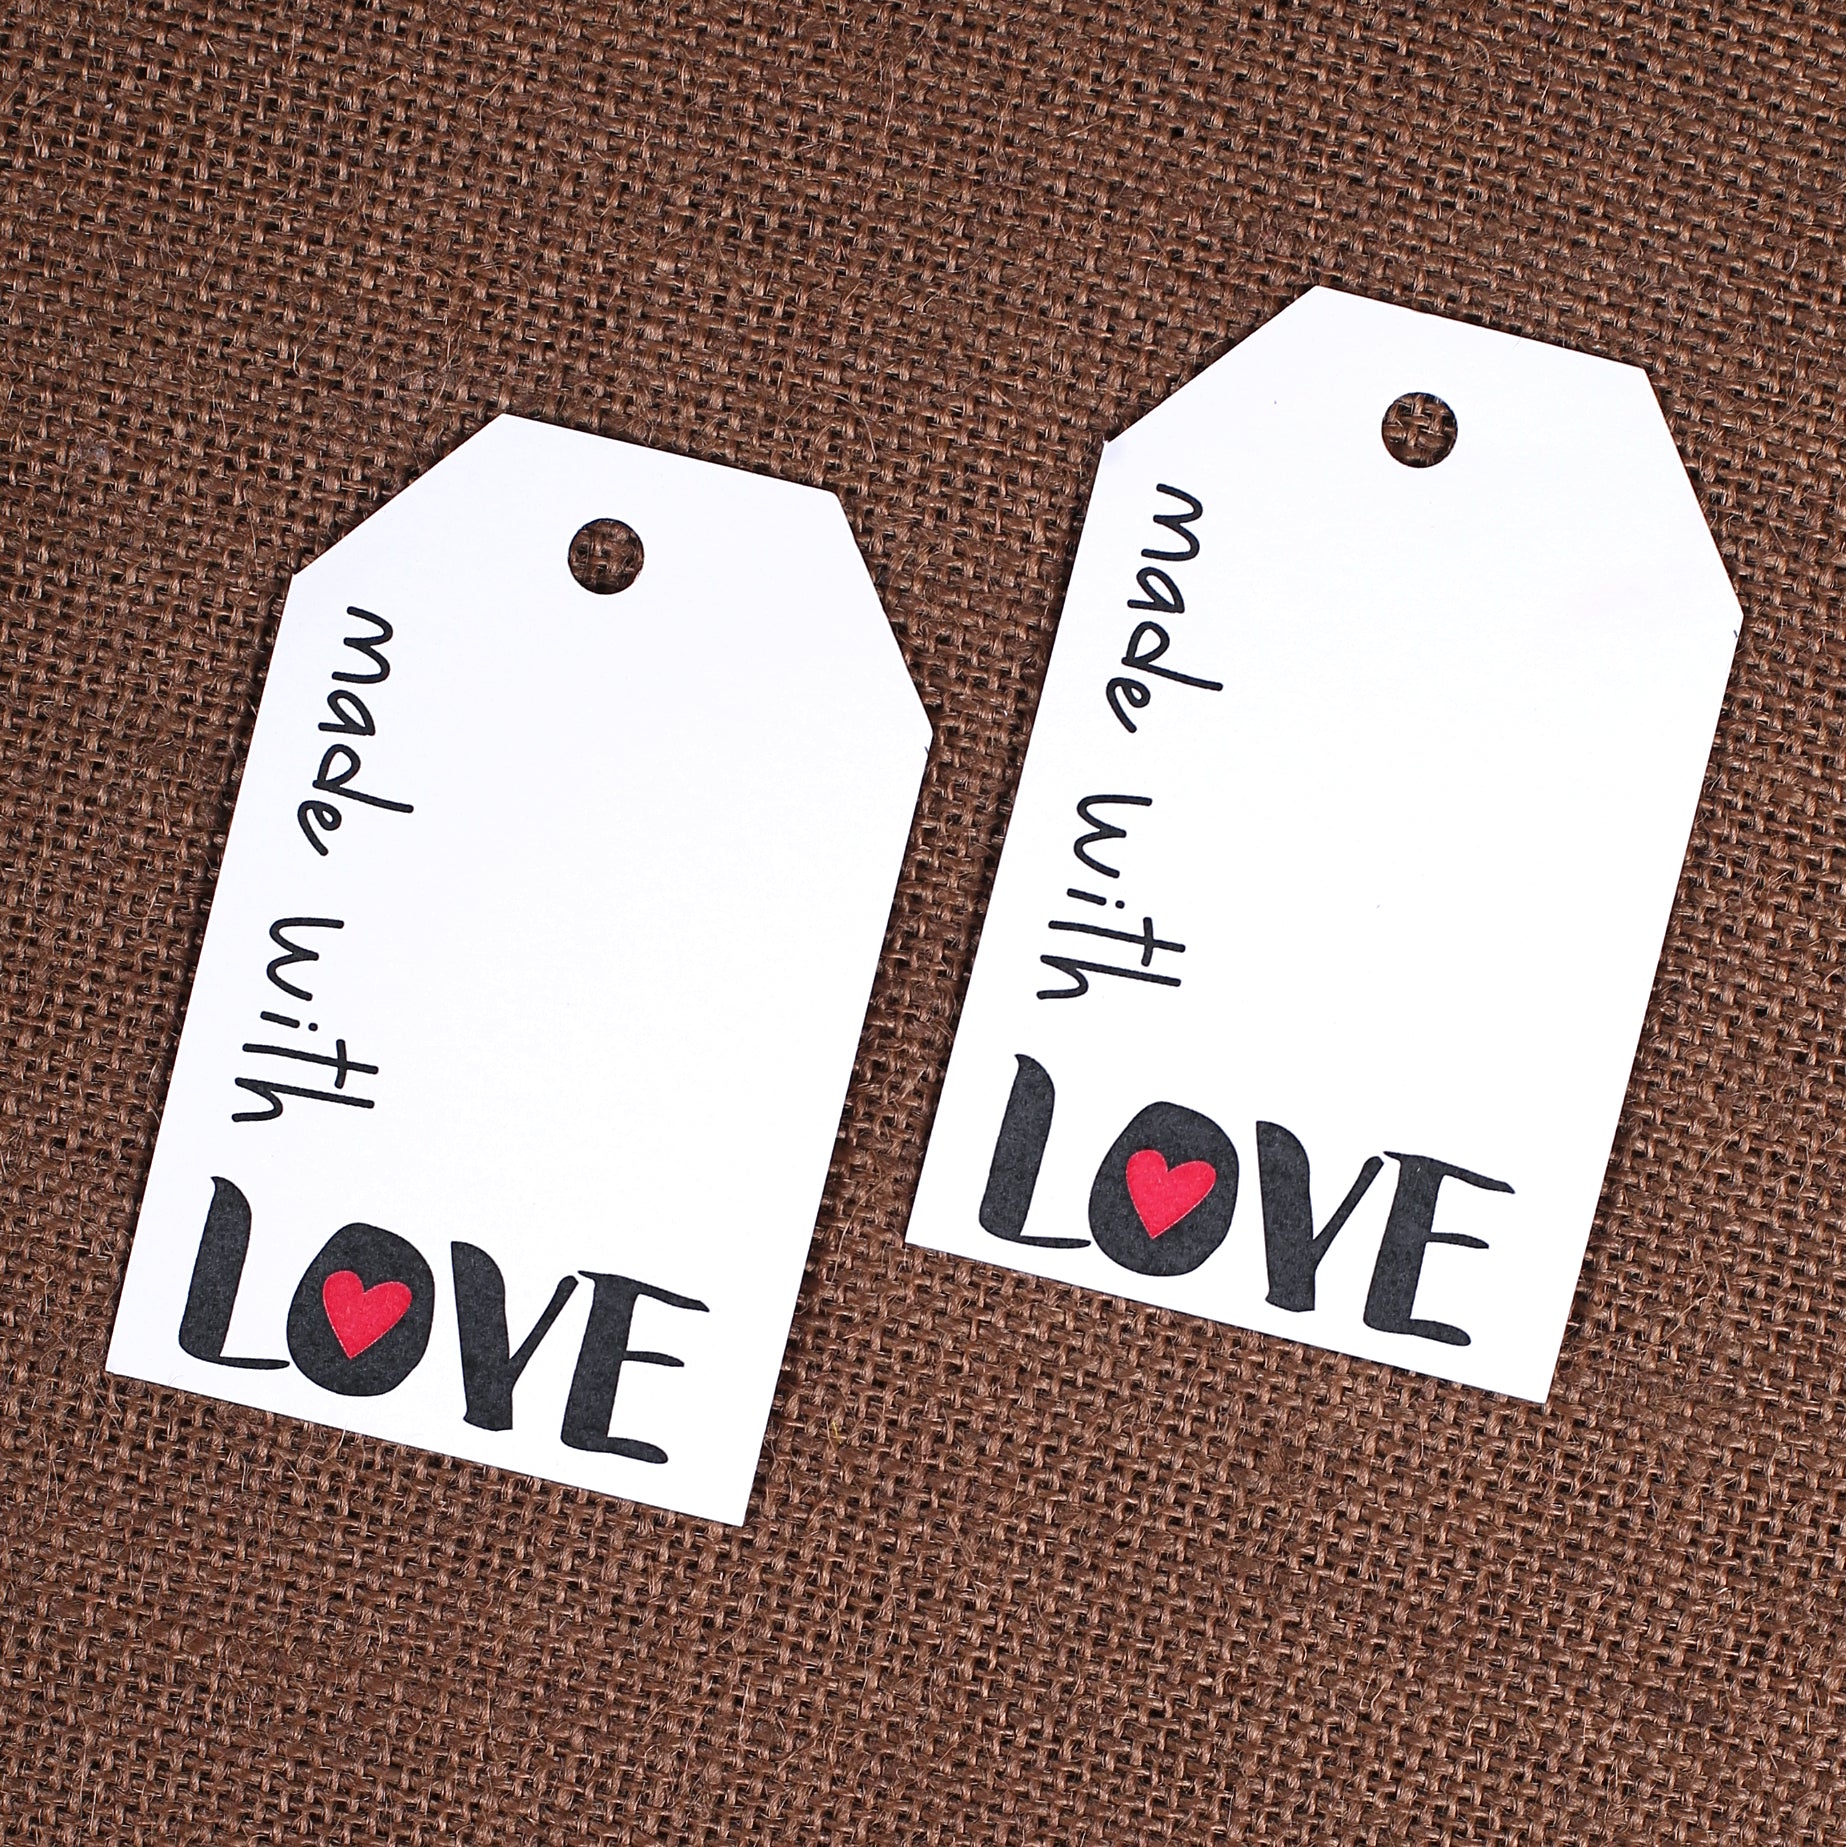 Made with Love Gift Tags | www.sprinklebeesweet.com